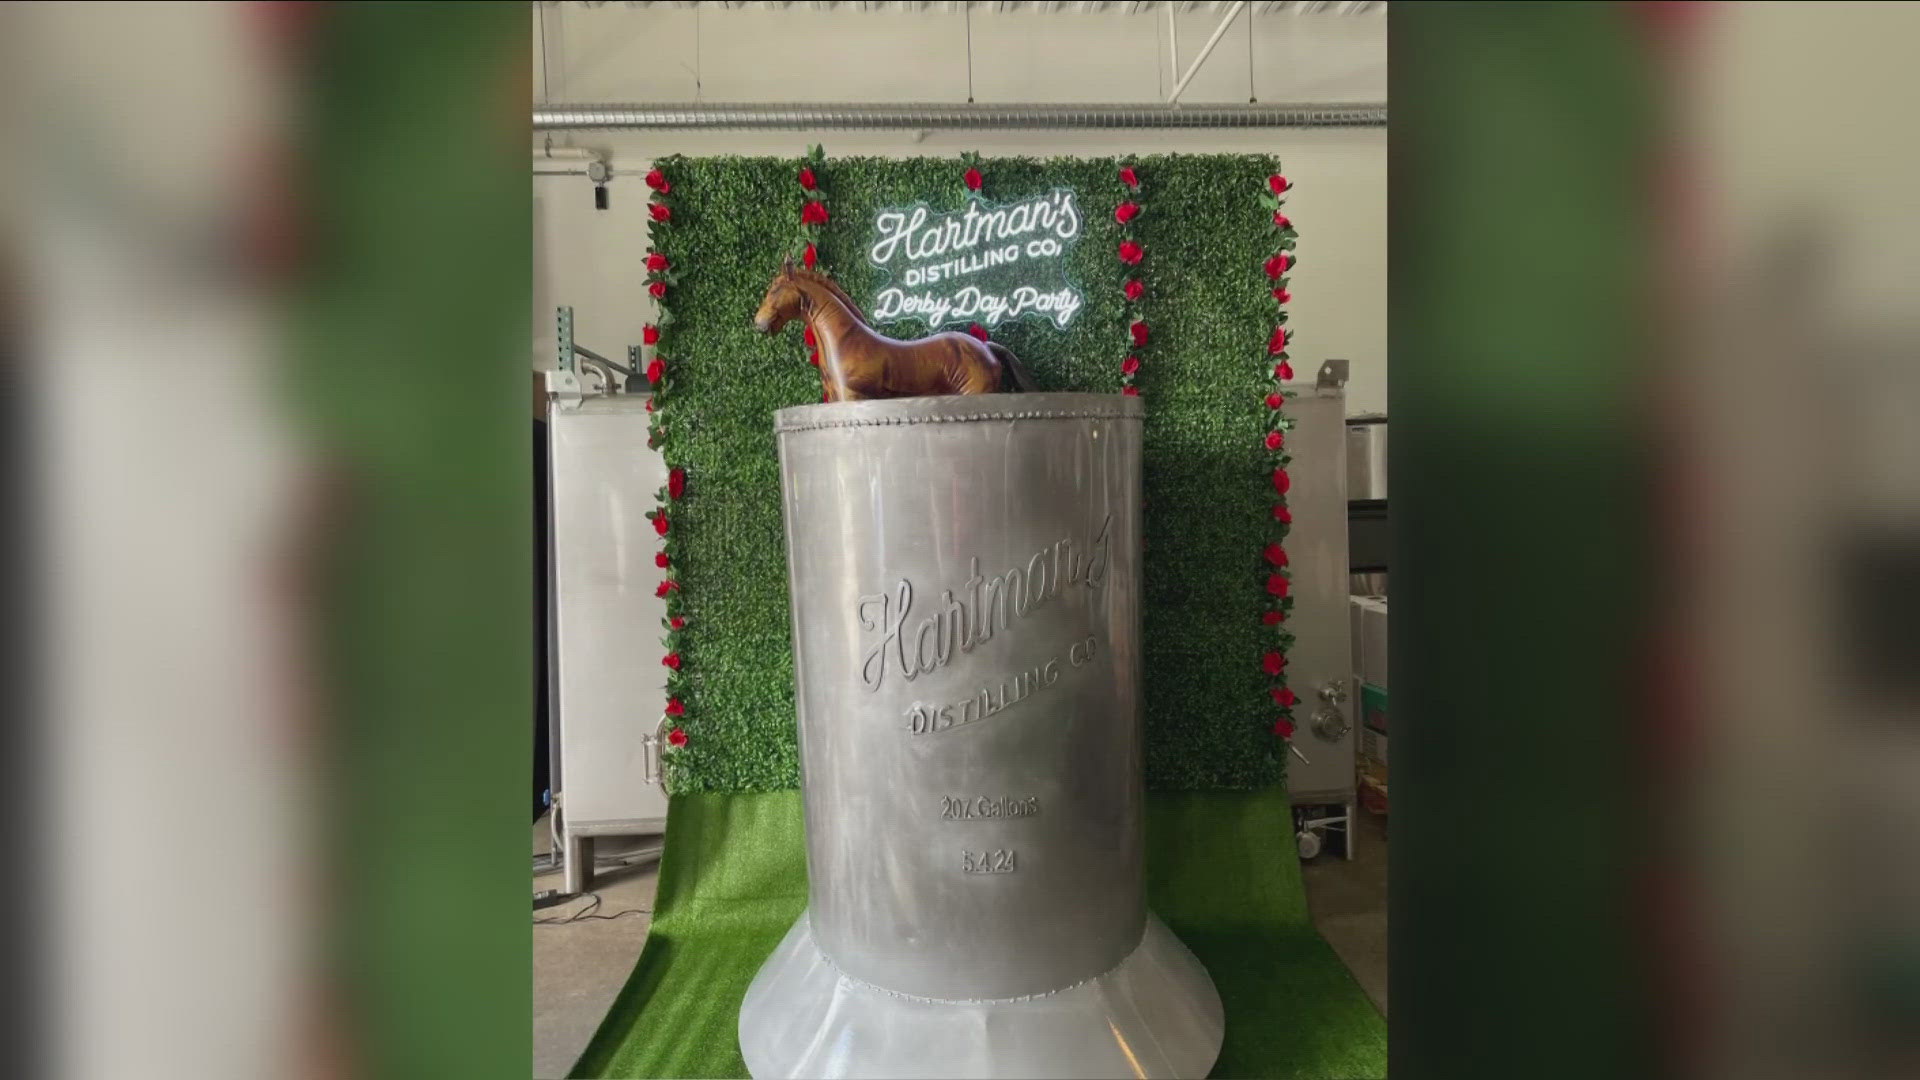 Hartman's Distilling Co. attempting largest Mint Julip for Derby Day Party